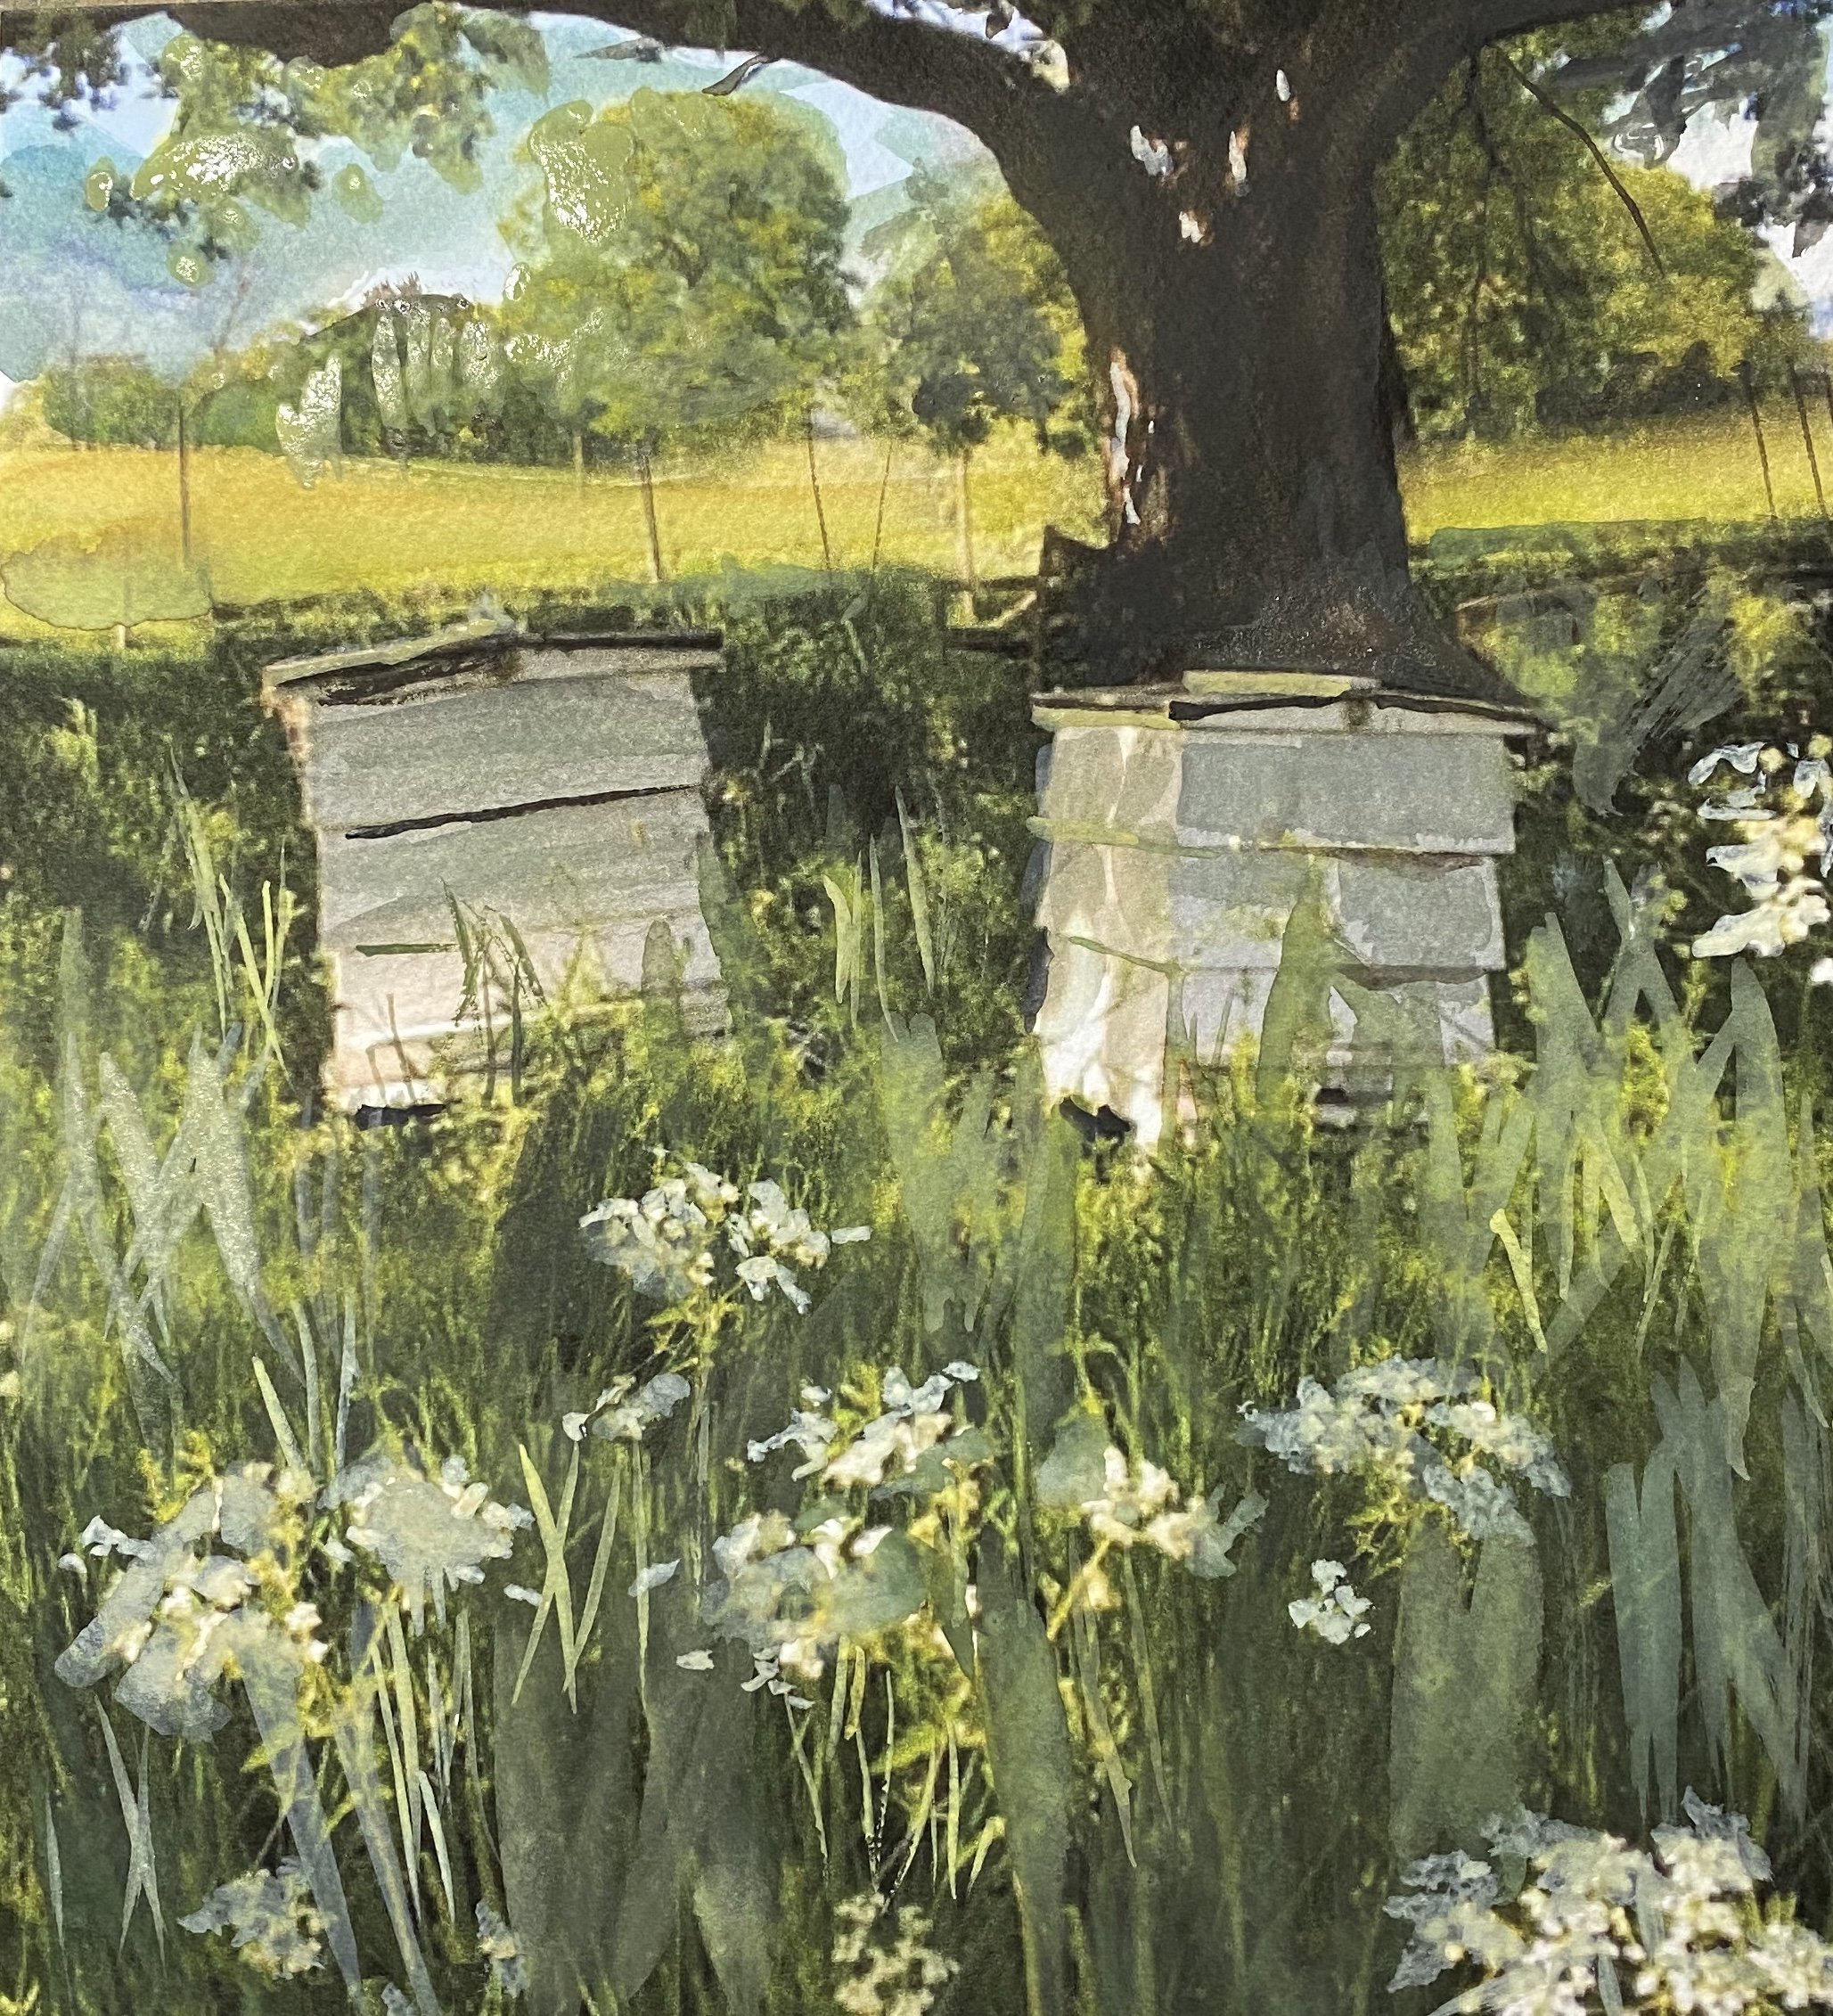 Beehives under trees, Woodhill Manor Surrey